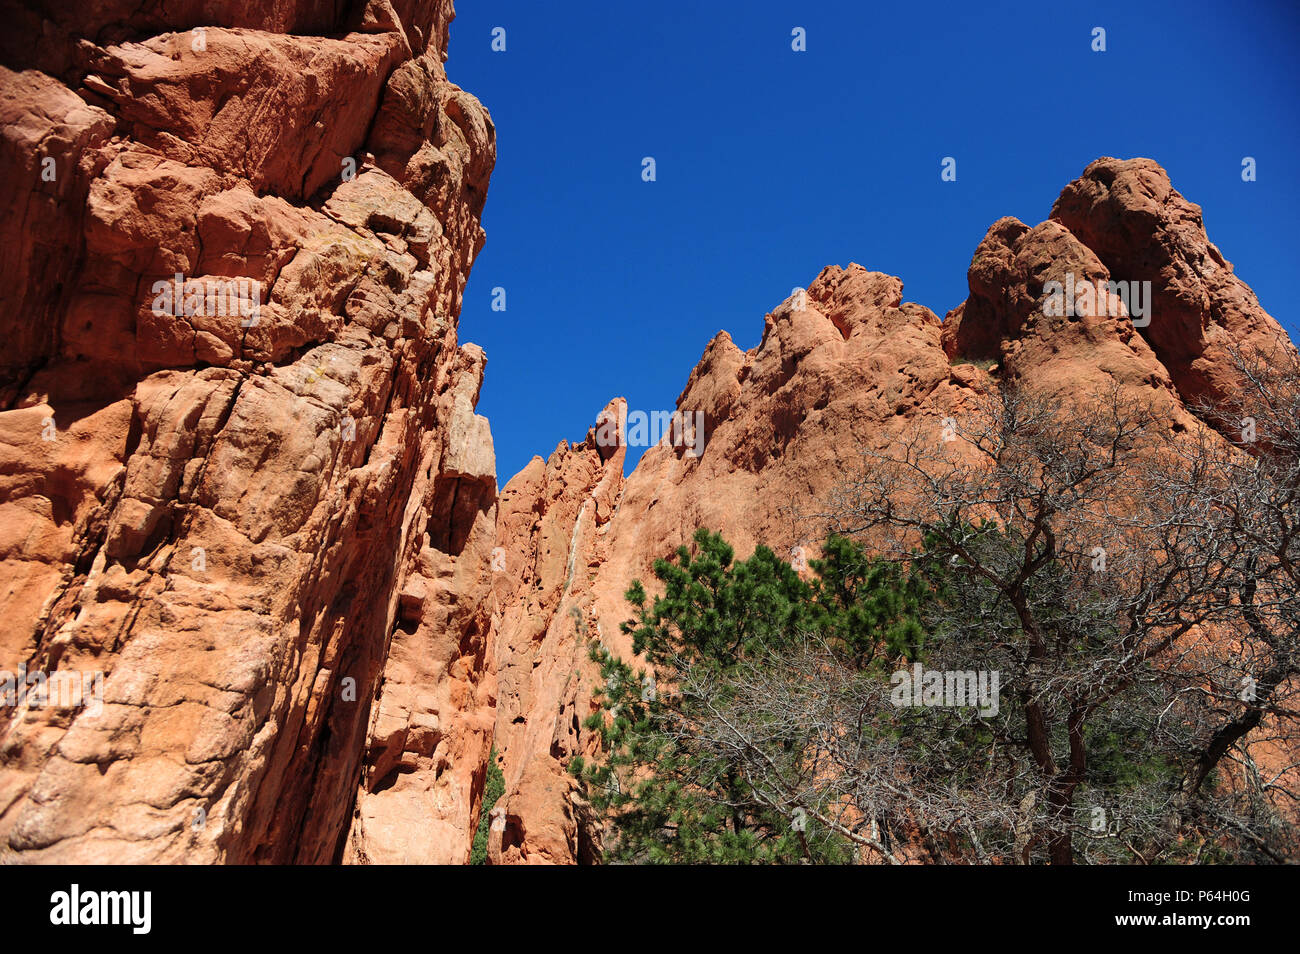 COLORADO SPRINGS, COLO.  – Towering slabs of orange sandstones rise 300 feet above the Garden of the Gods, April 7, 2016. Traveling the park’s paths will get you up-close views of famous rock formations like the Tower of Babel, Gateway Rock, the Three Graces, Kissing Camels, the Sleeping Giant and the Balanced Rock.  (U.S. Air Force photo/Staff Sgt. Amber Grimm) Stock Photo